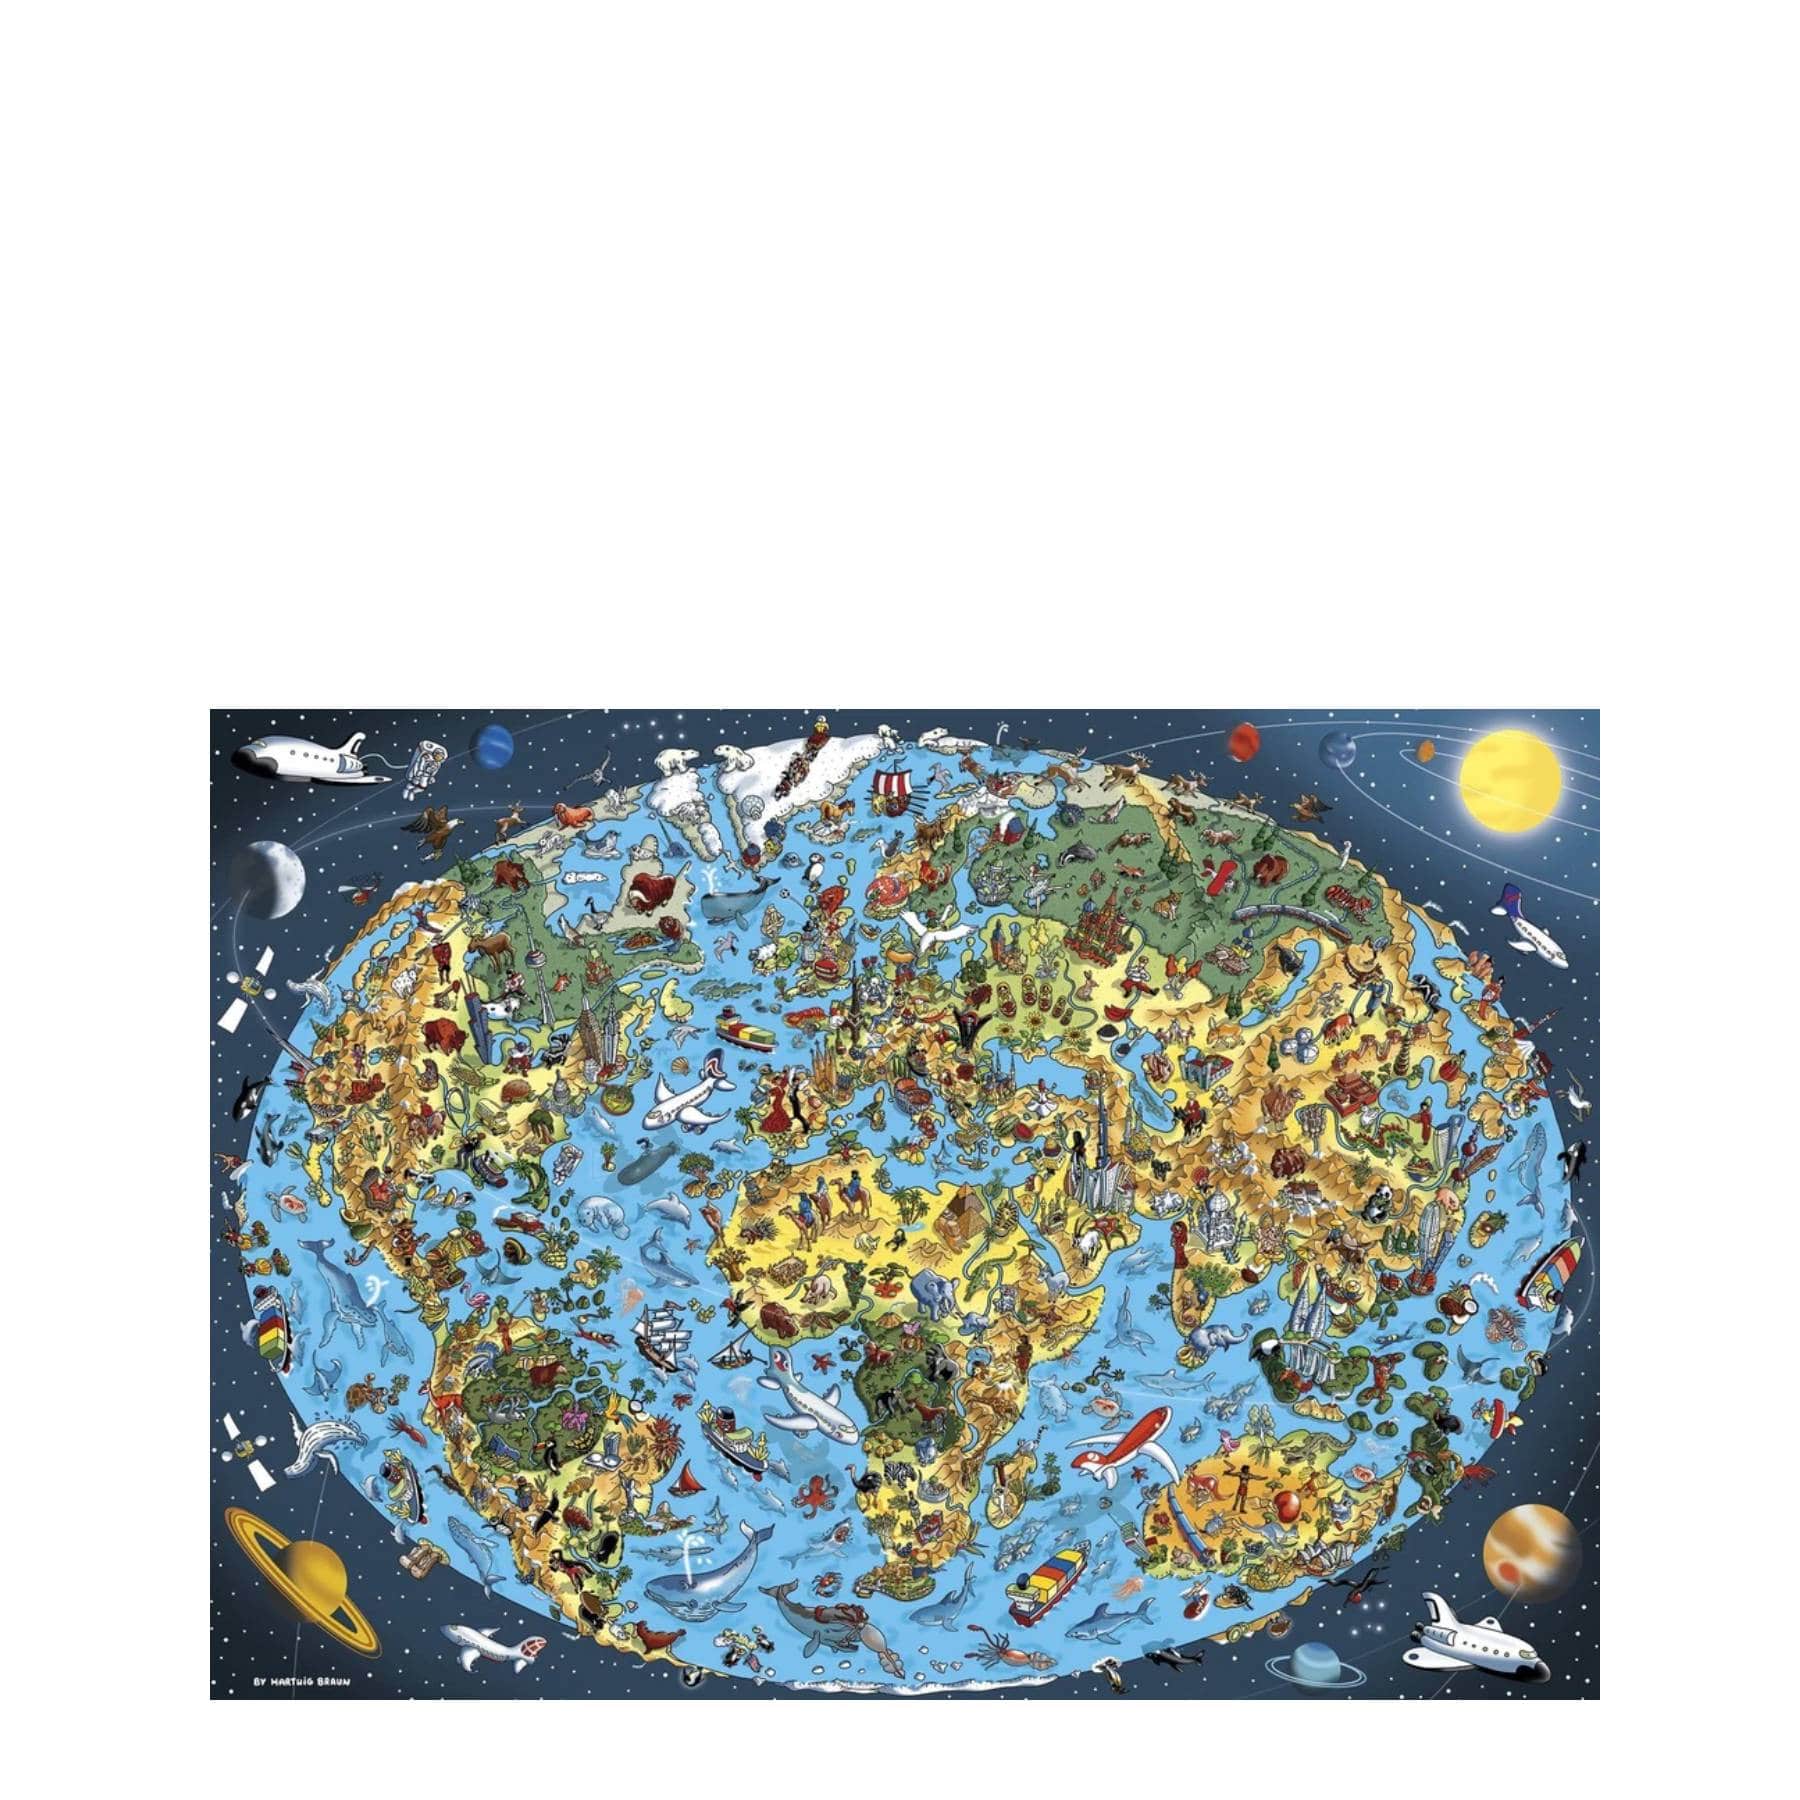 Our great planet 100 piece jigsaw puzzle